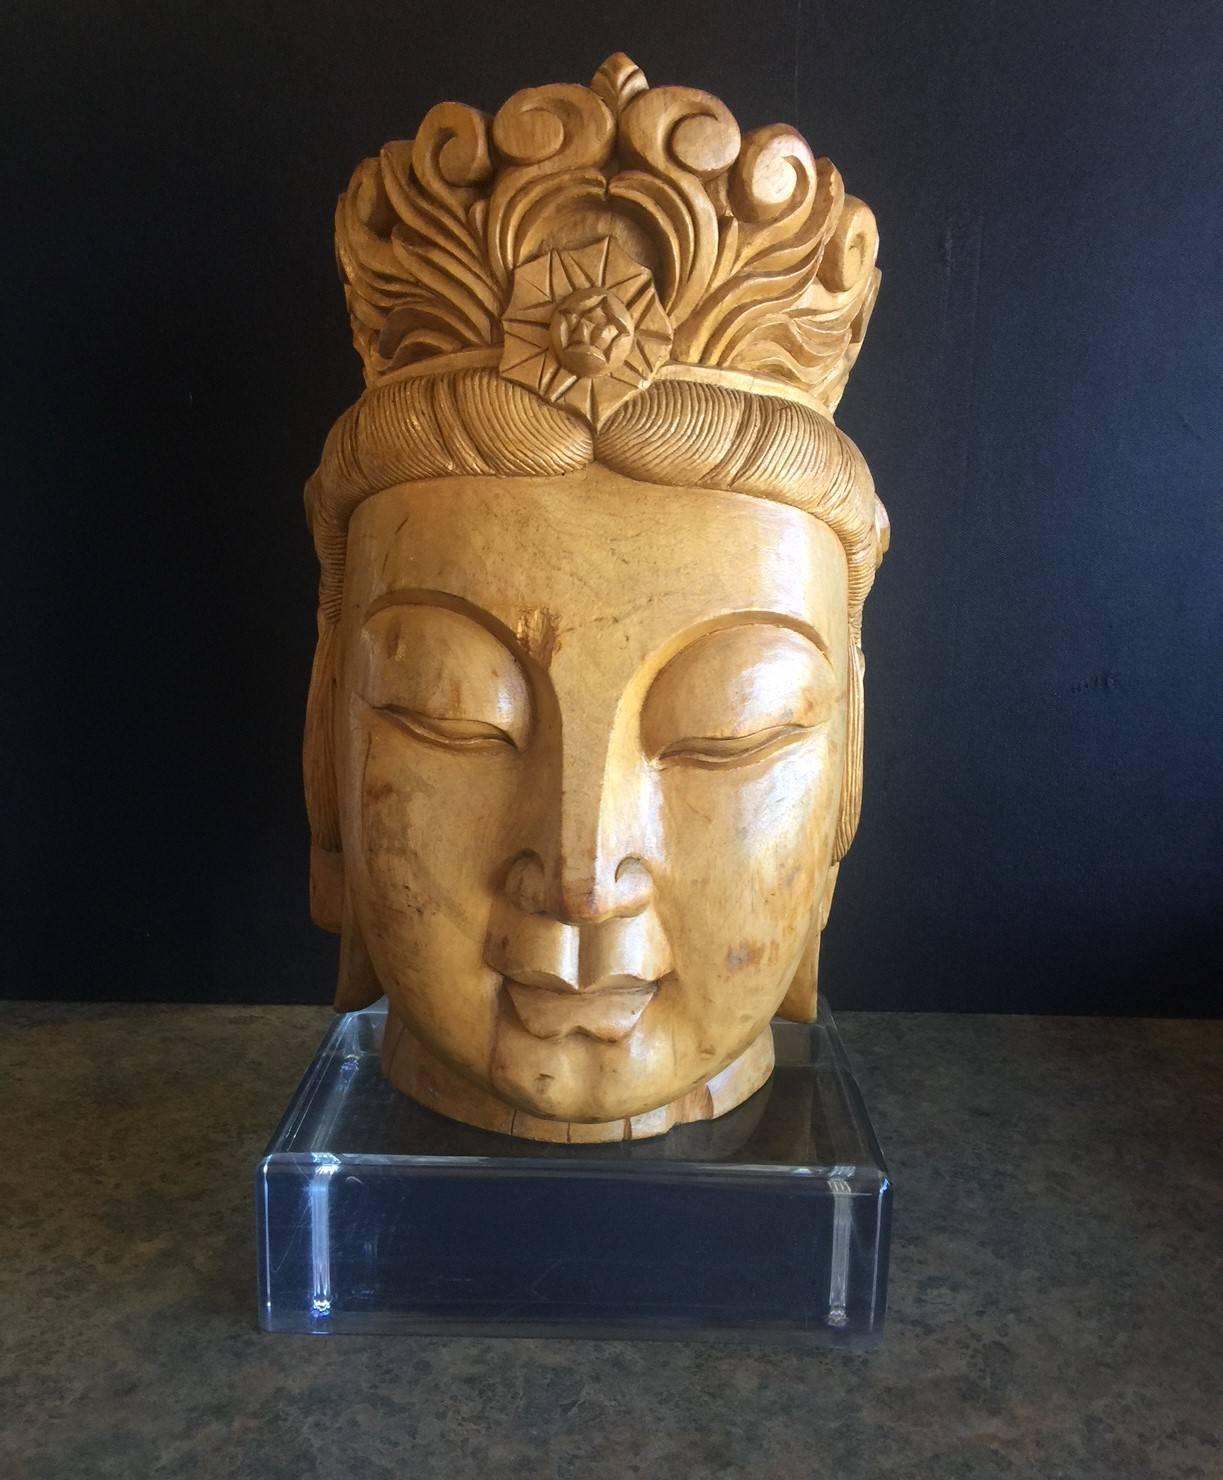 A very cool and impressive hand carved wooden Buddha head on a large solid acrylic base. There are a couple of small wood gouges on the piece (see pictures), but they only add to the charm and elegance of the sculpture.